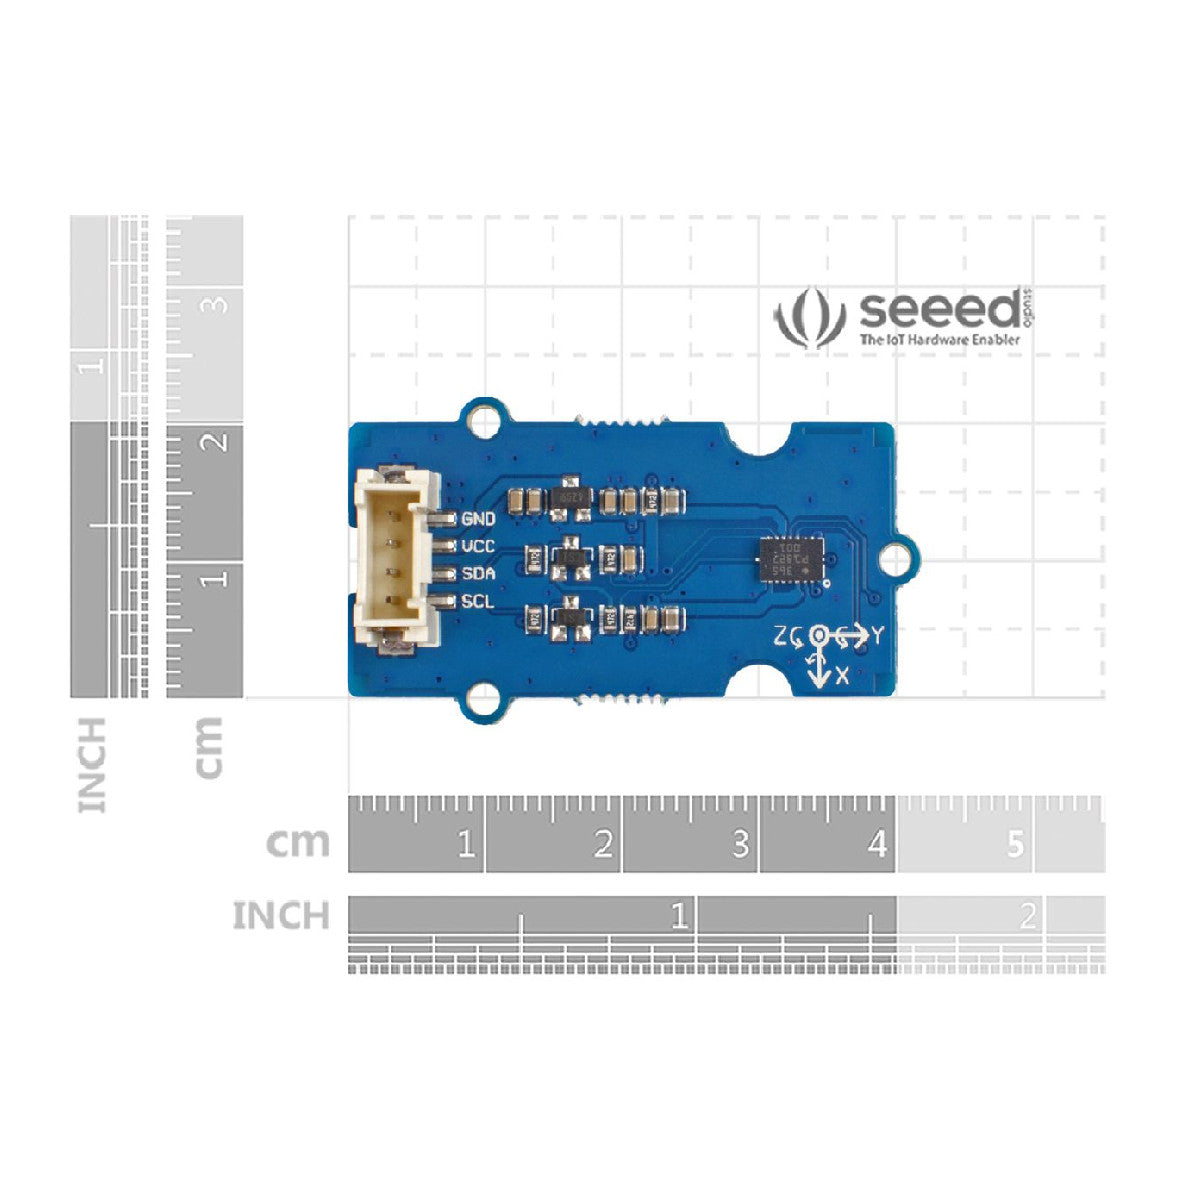 Seeed Studio Grove 6-Axis Accelerometer and Gyroscope, BMI088